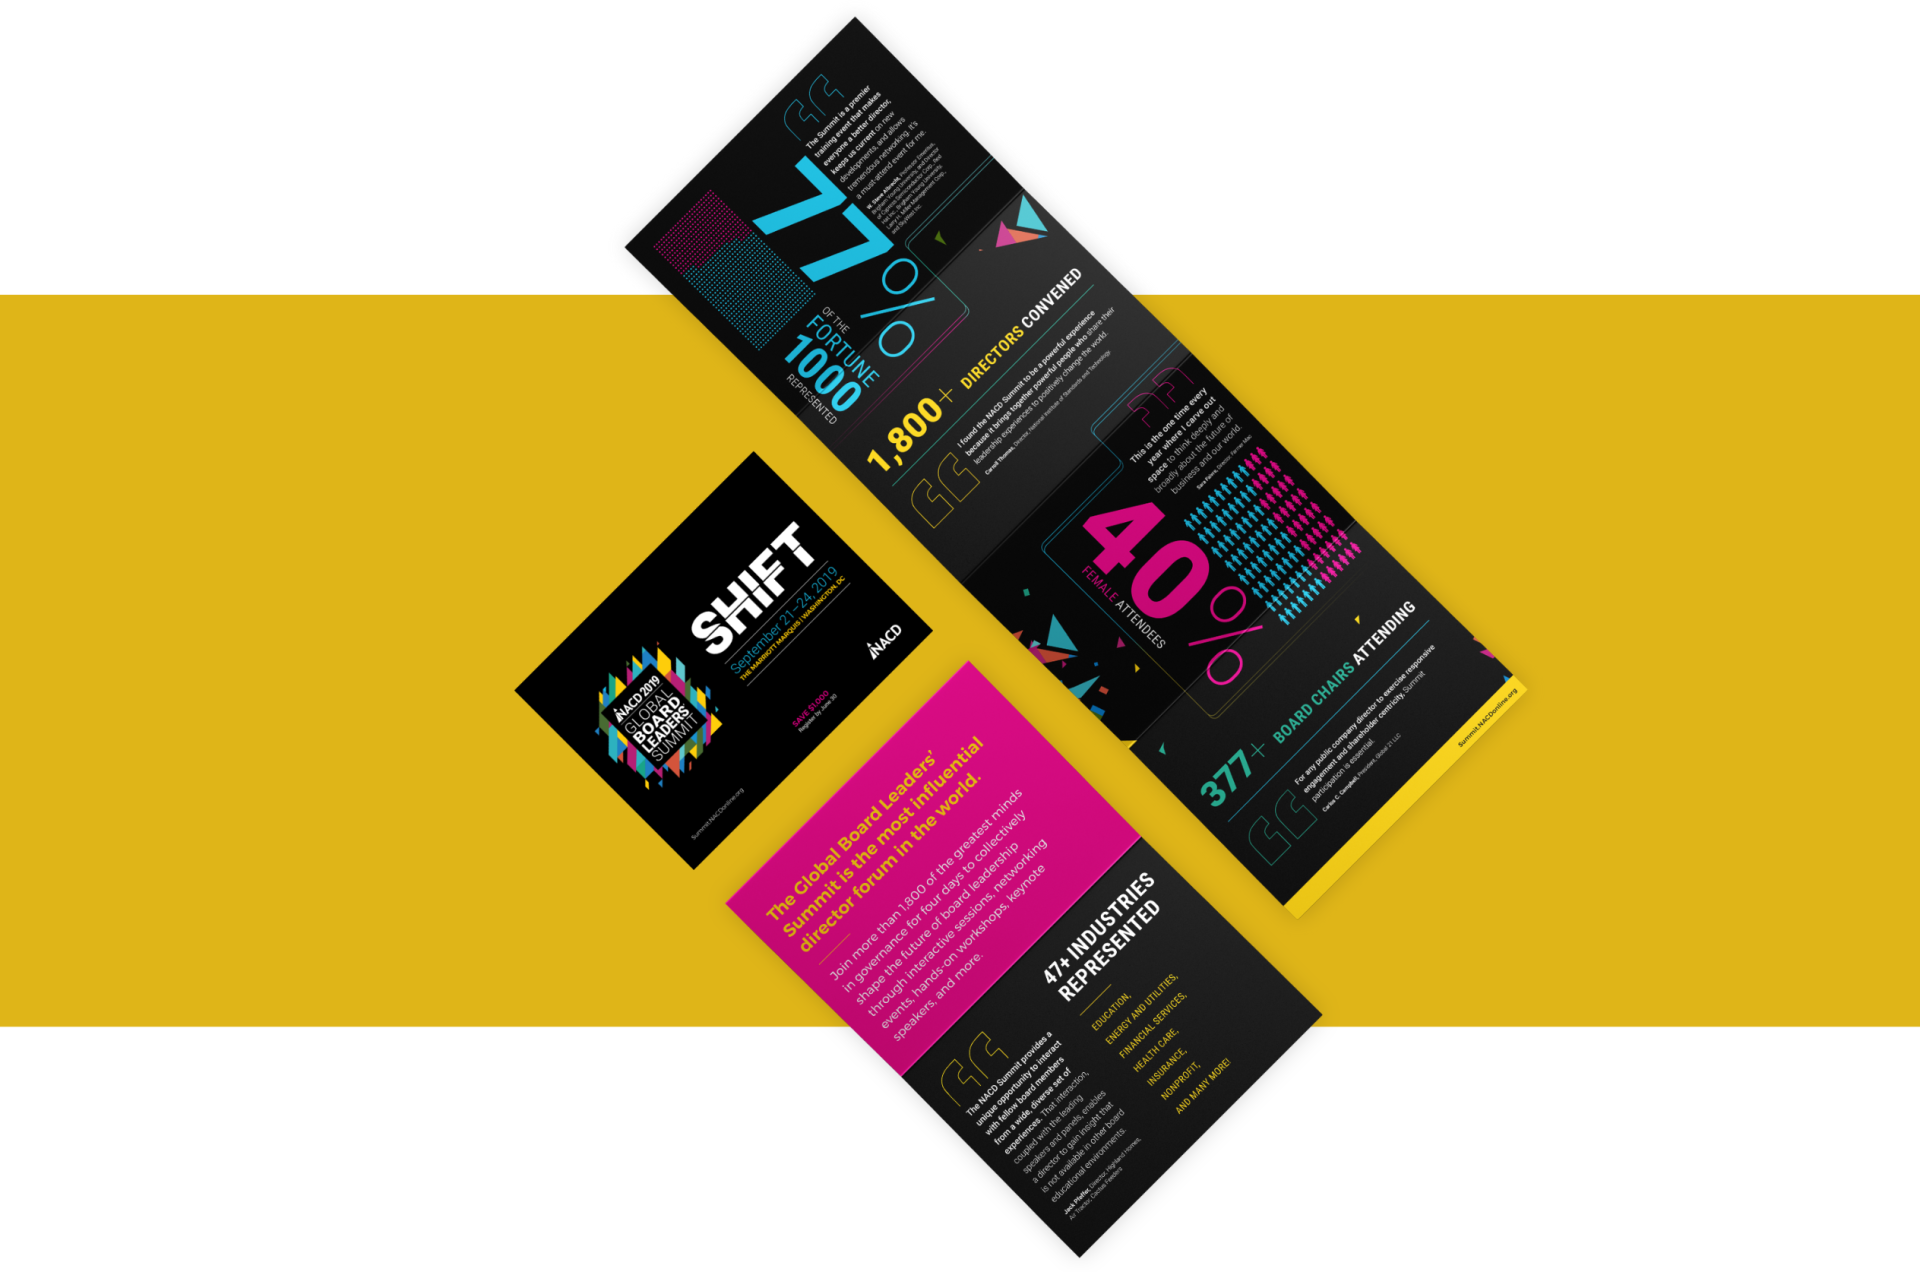 Colorful and modern NACD Shift infographic brochures spread out diagonally across a two-tone yellow and dark gray background, showcasing vibrant graphics and statistical data.